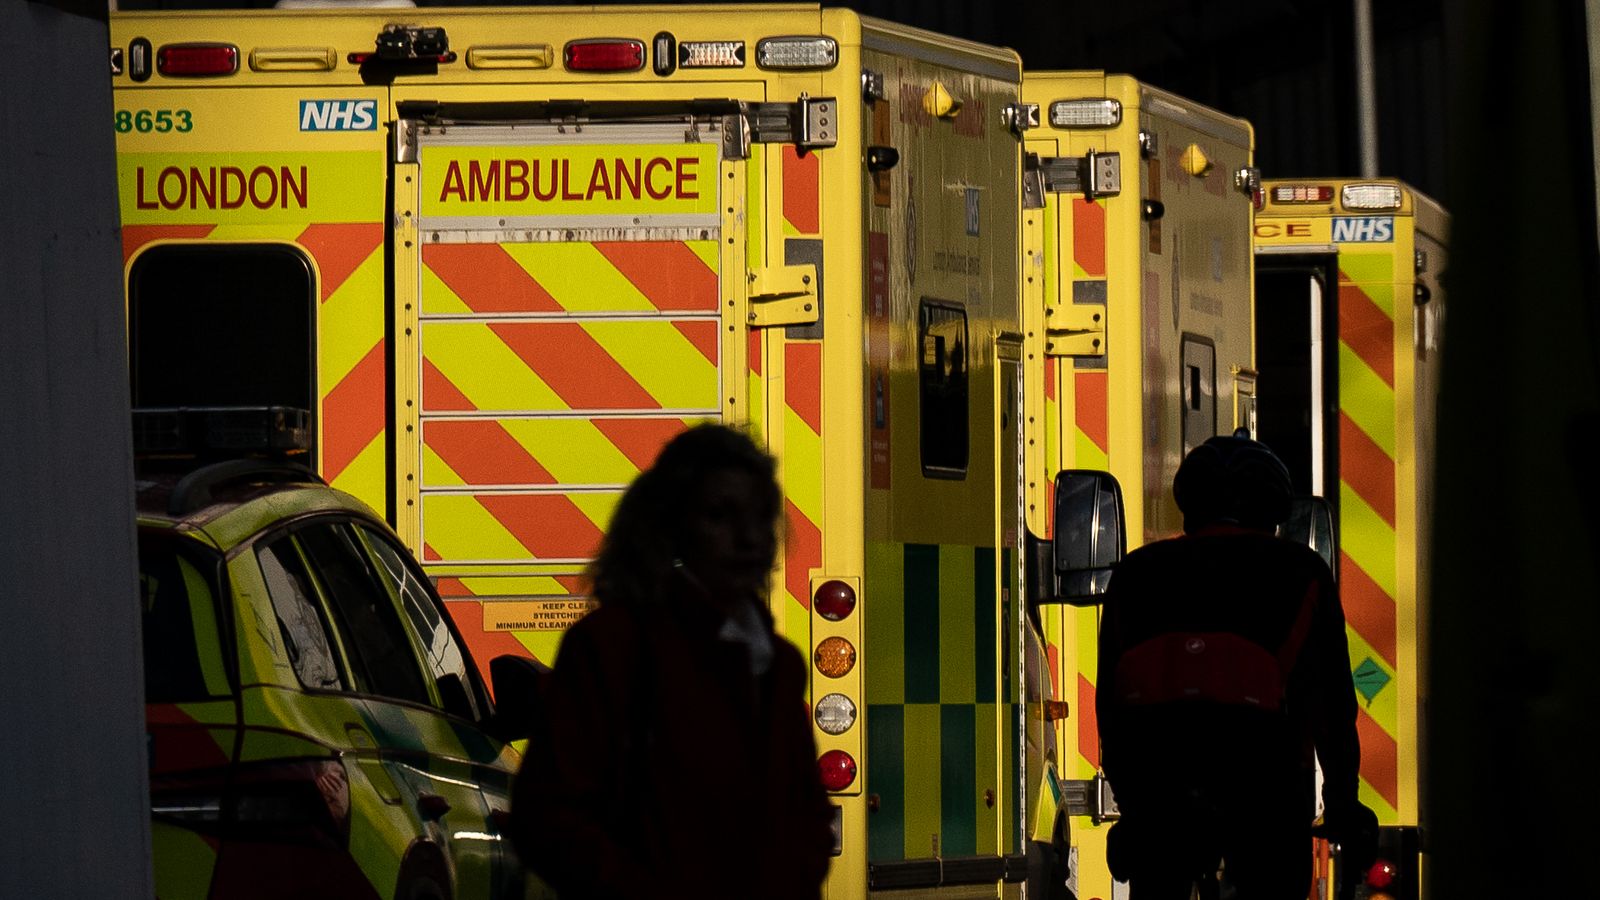 More than 23,000 died in A&E in England last year, data obtained by Labour shows